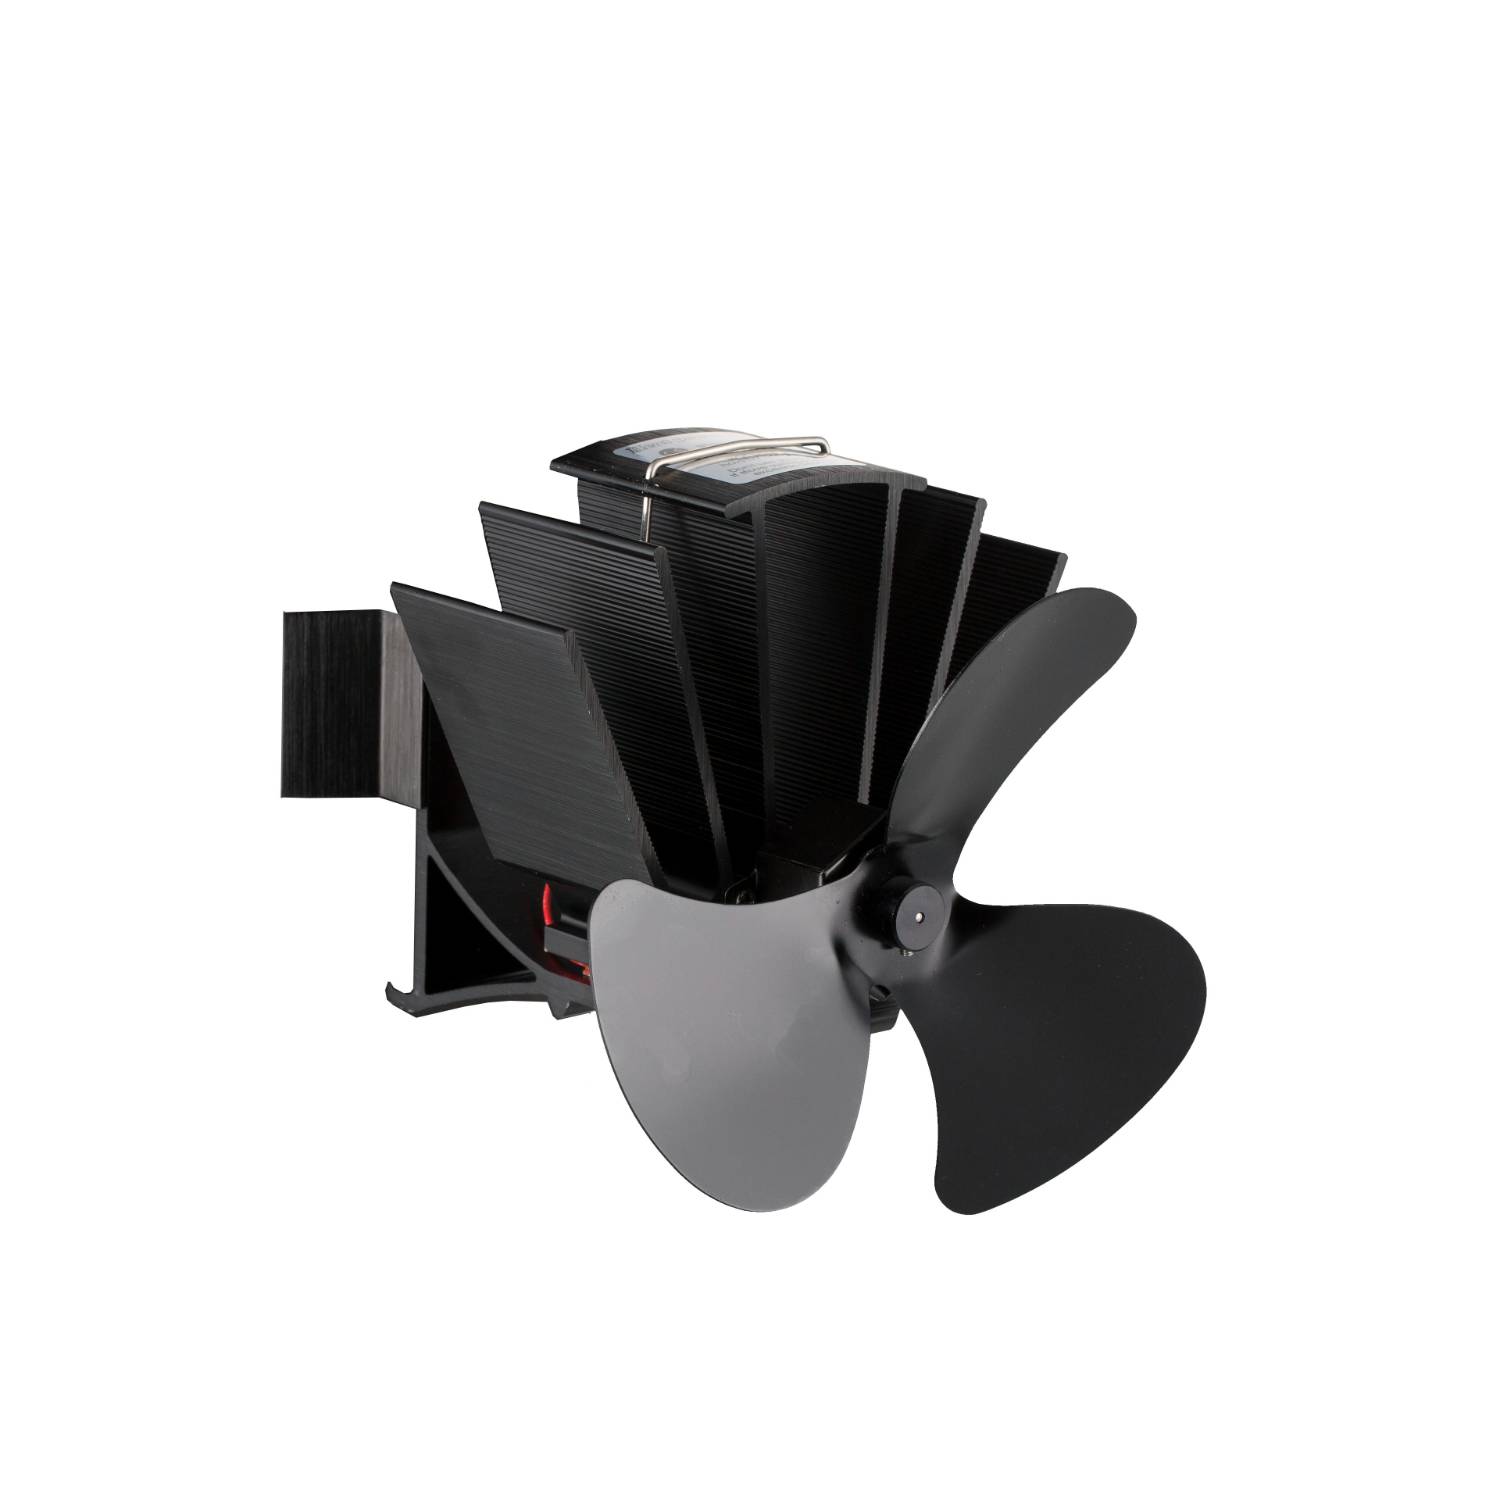 Heat Powered Stove Fans